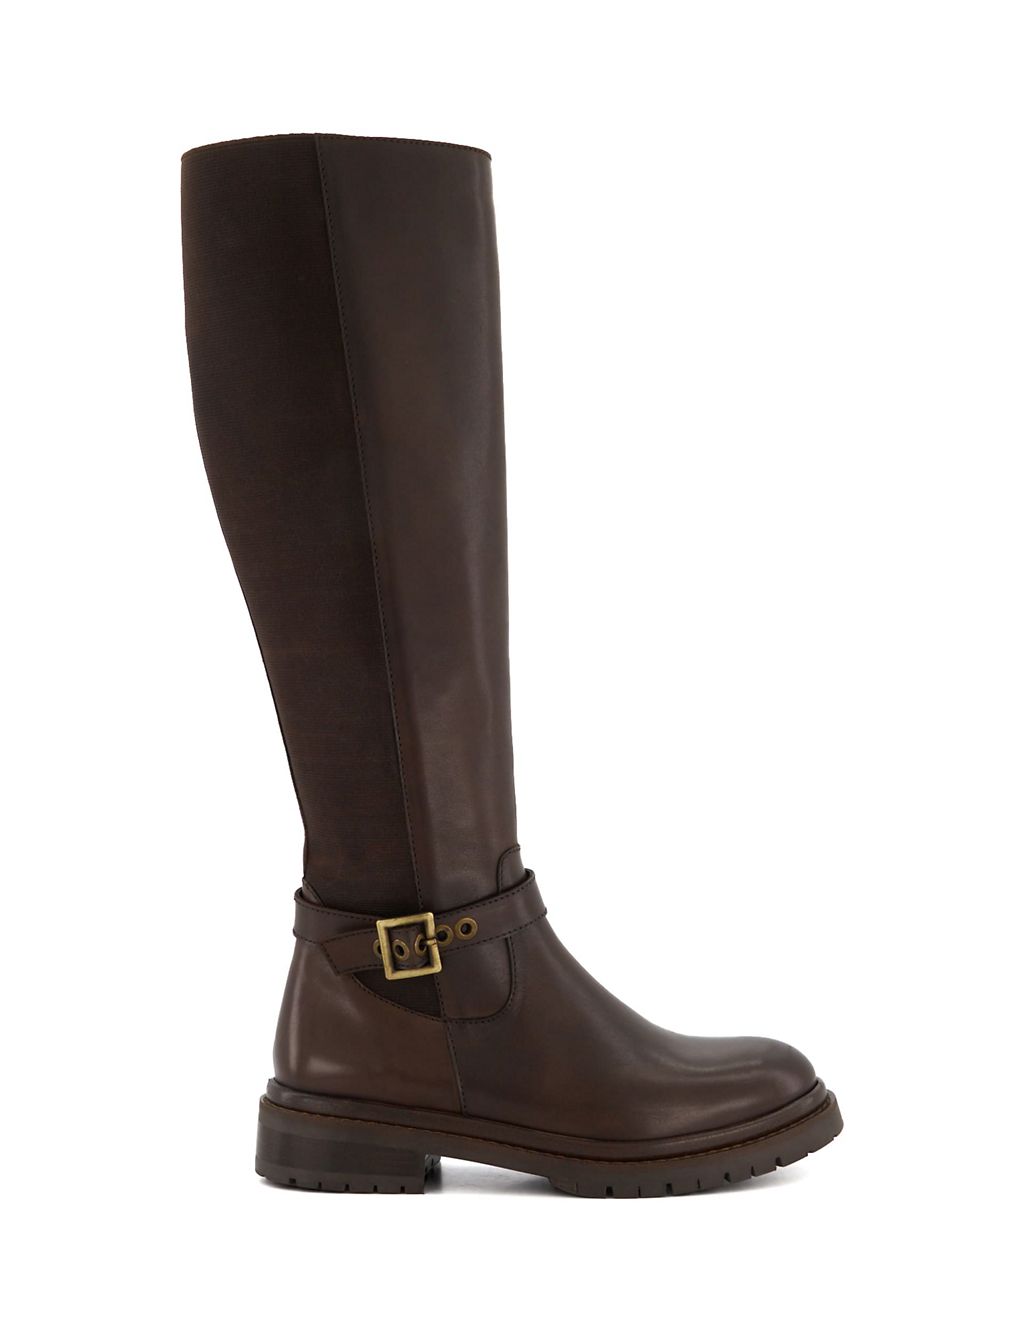 Leather Buckle Flat Knee High Boots 3 of 4